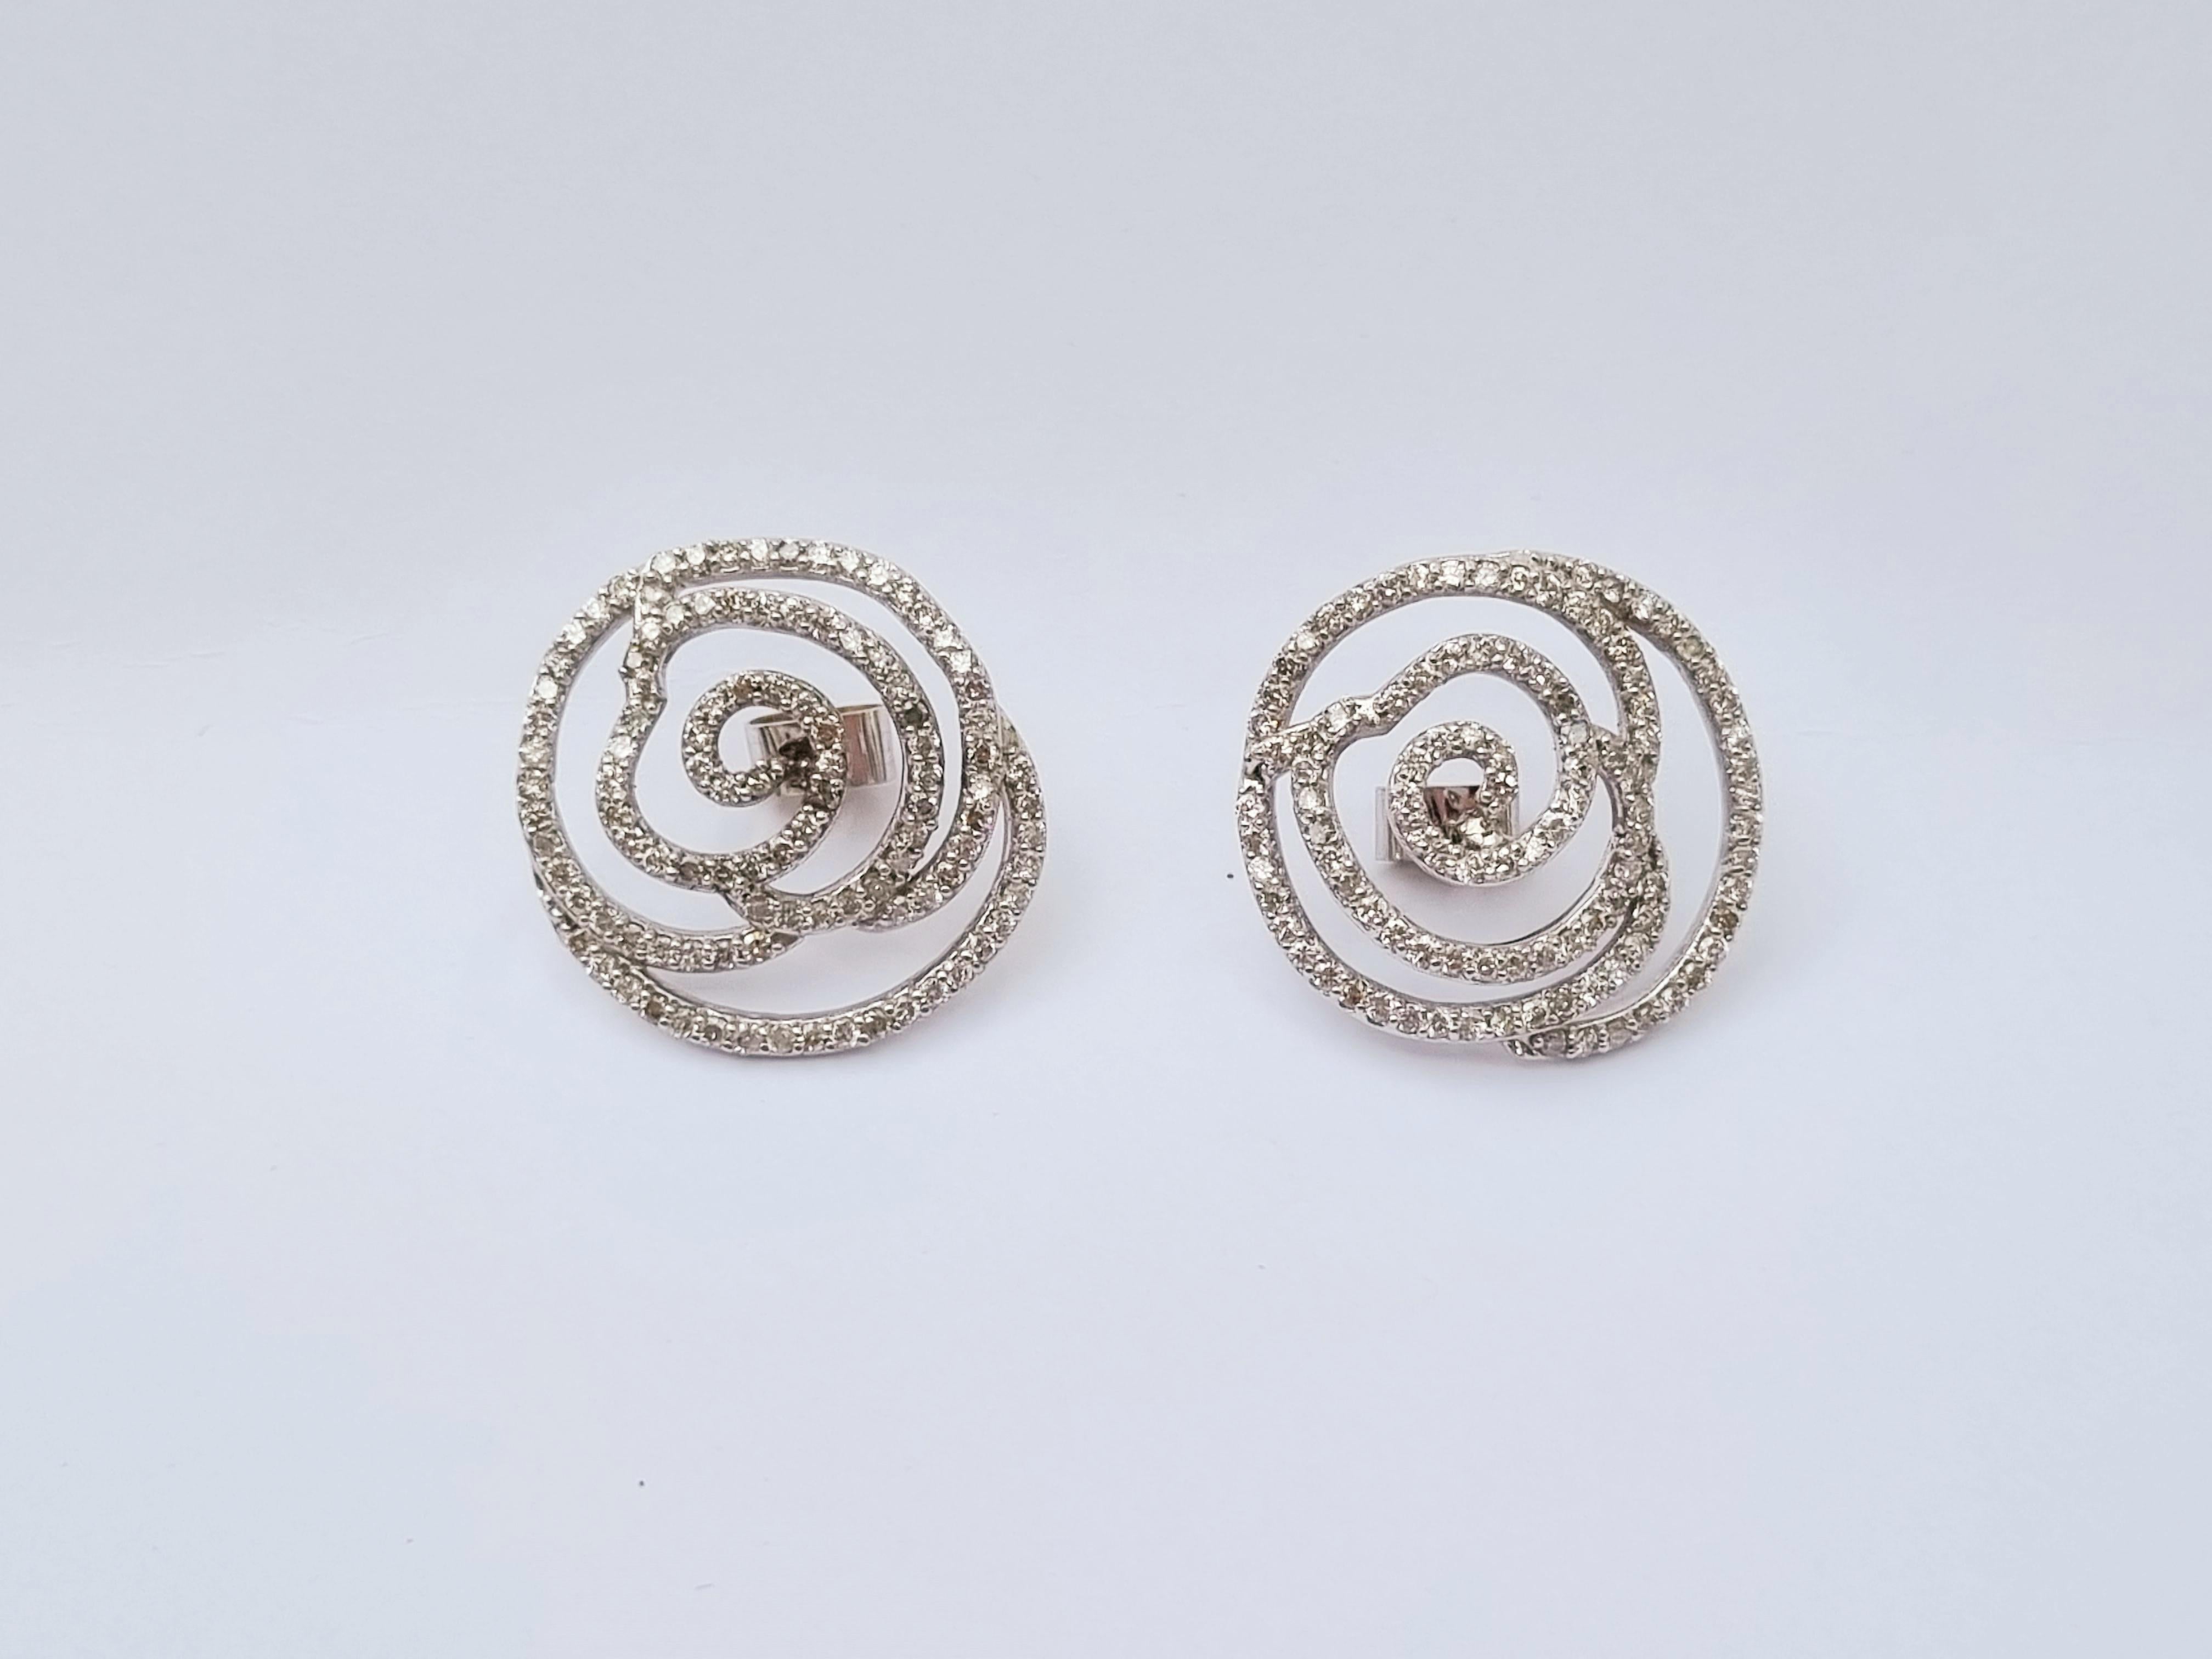 A gorgeous pair of 2,63 ct pave diamond earrings inspired by white roses. Elegant and modern, they are extremely easy to wear with both day or night outfits and for all type of occasions. 

Diameter: 2.5 cm
total weight: 8,6 gr
Material: 18k solid